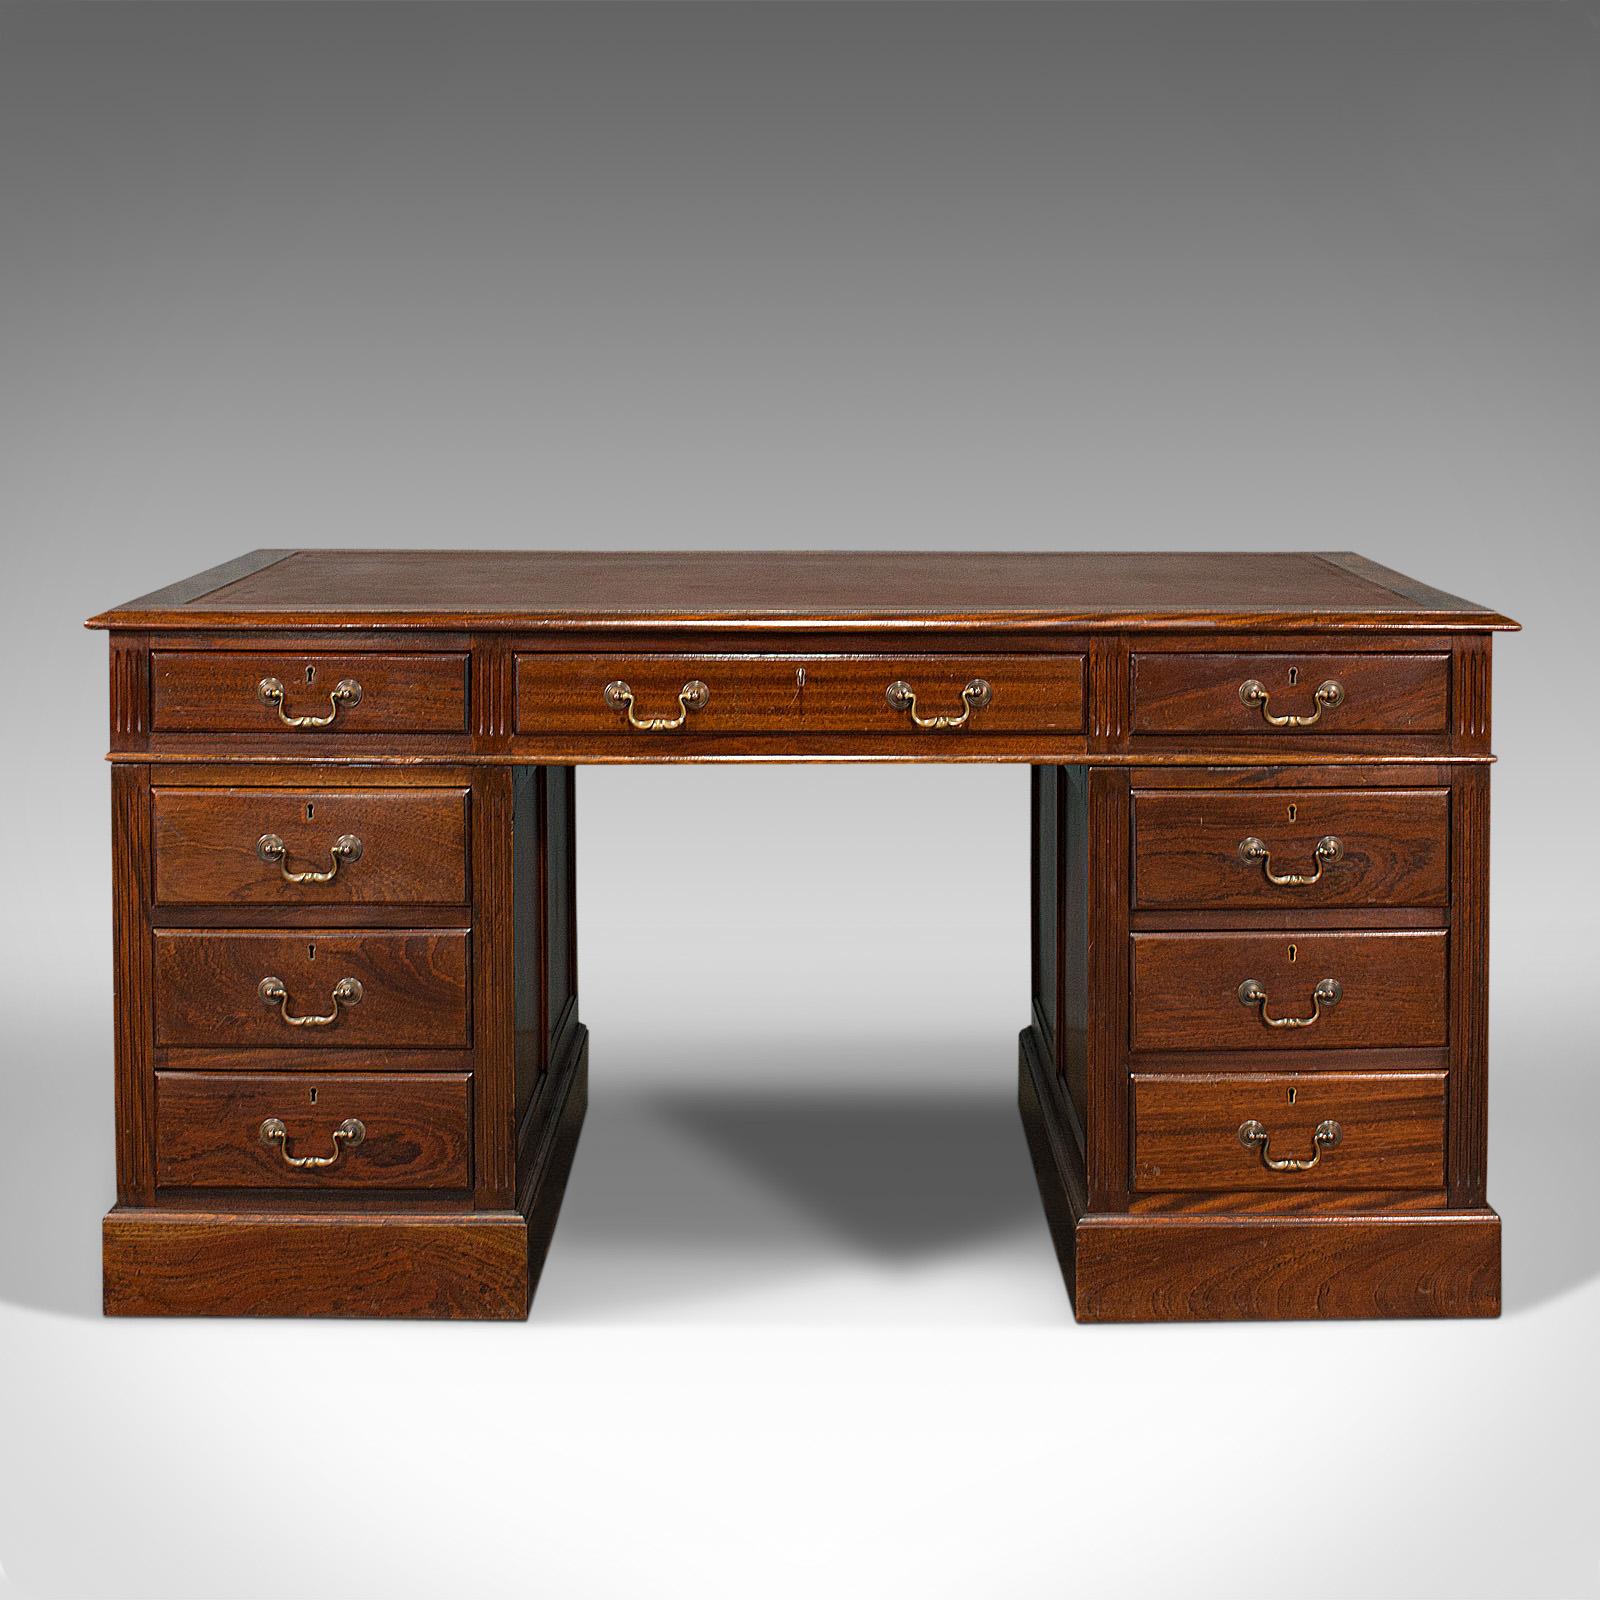 This is an antique partners desk. An English, mahogany and leather writing table, dating to the Edwardian period, circa 1910.

Strikingly presentable partner's desk with twin pedestal form
Displaying a desirable aged patina throughout
Select